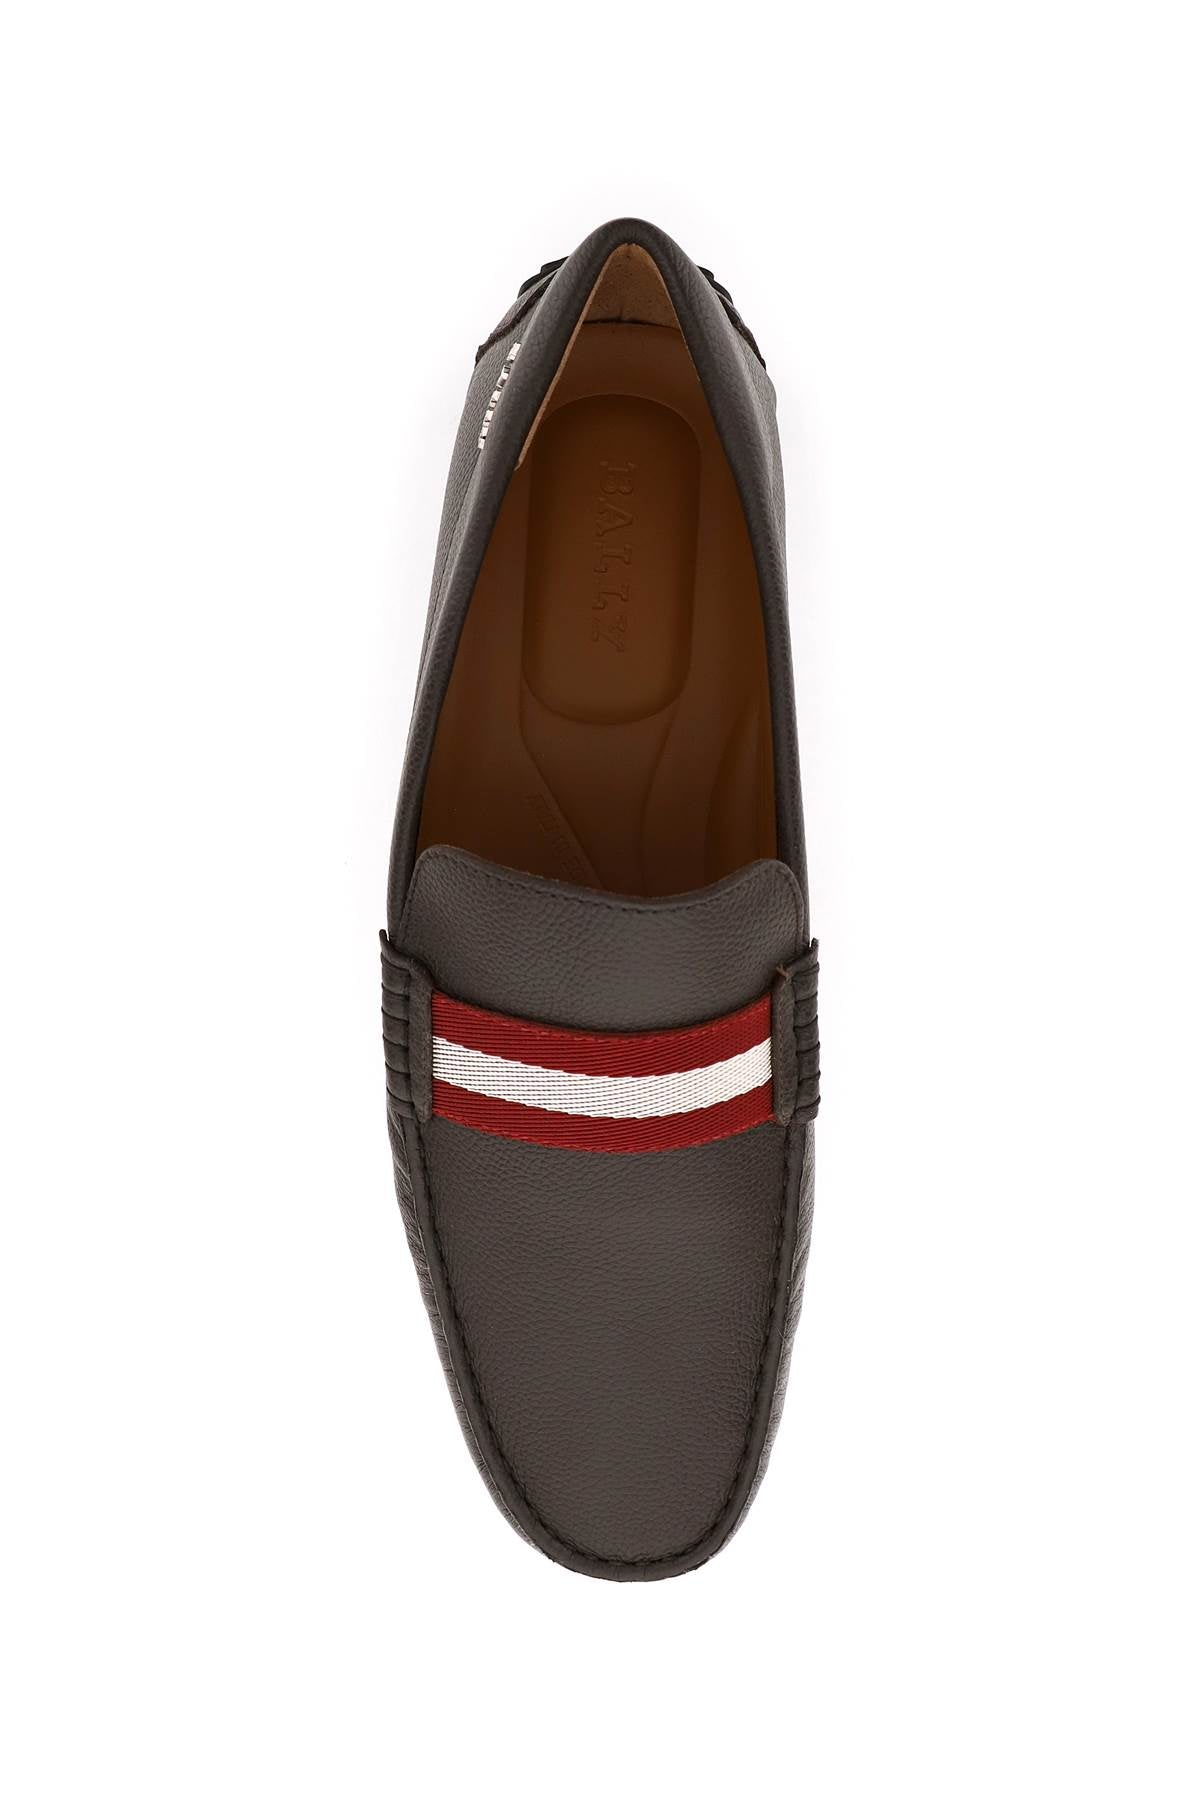 BALLY 'pearce' loafers 585330F341